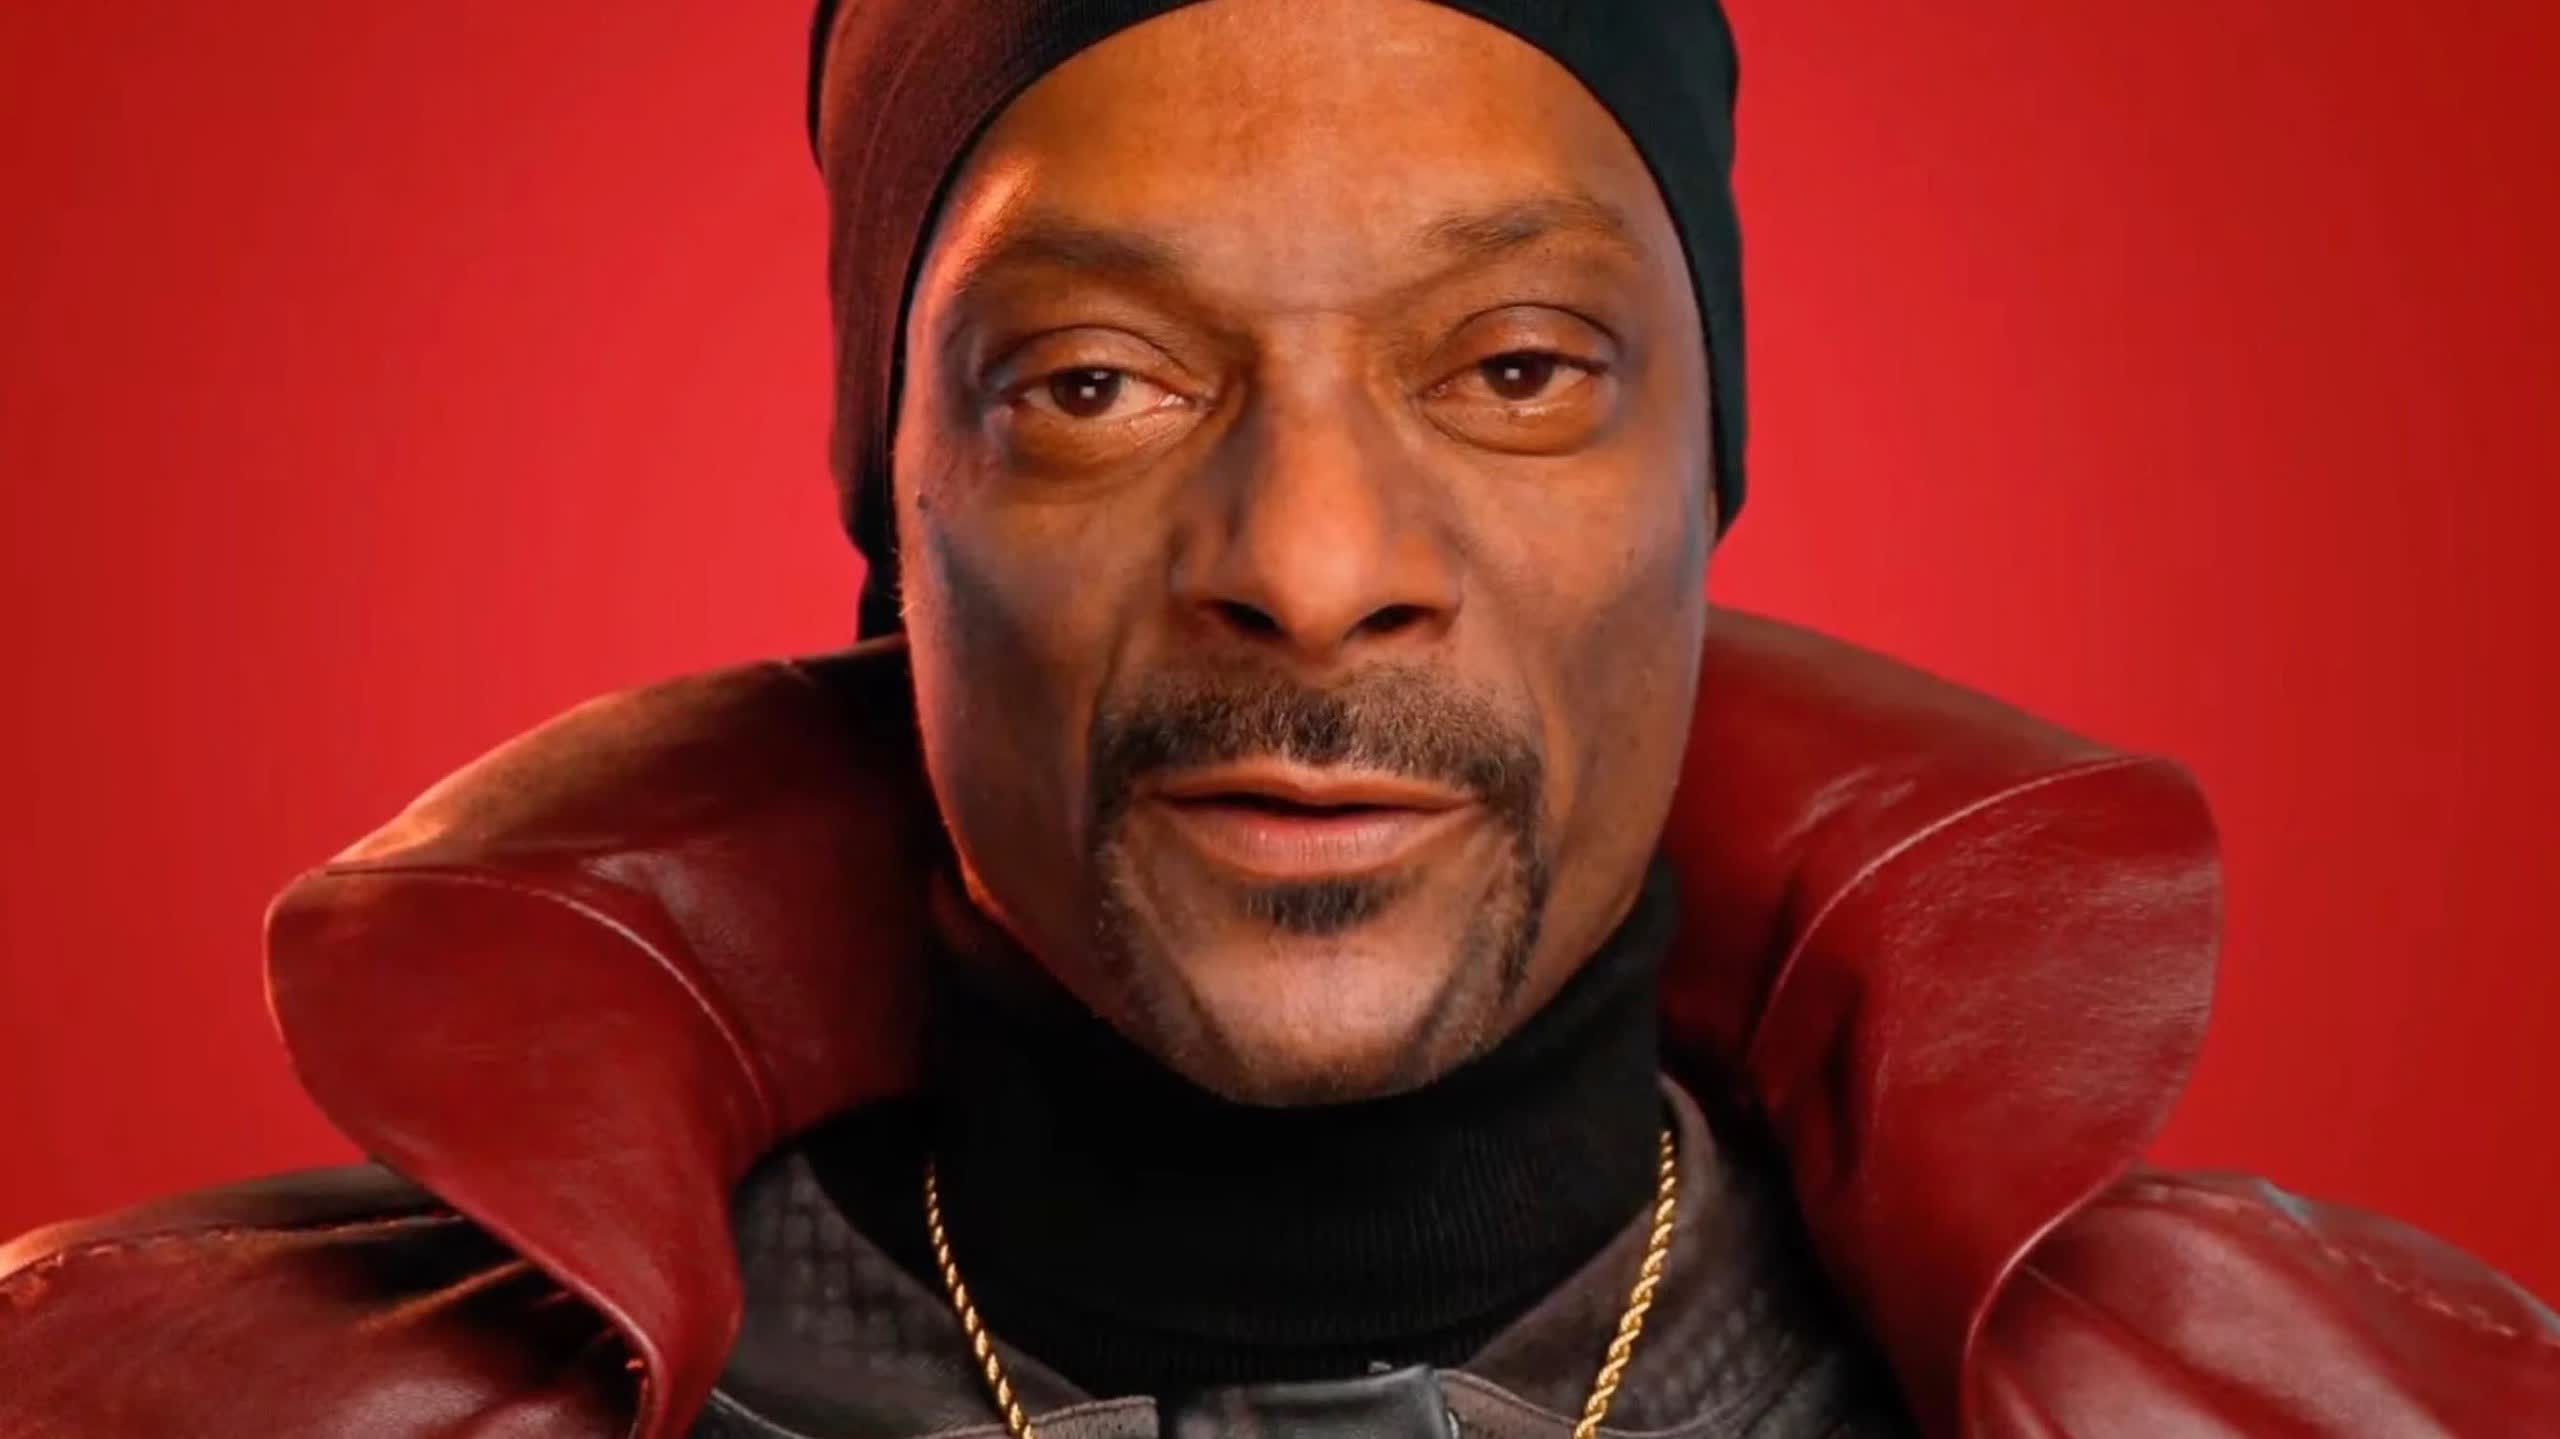 Watch Mark Zuckerberg awkwardly attempt to hype a Snoop Dogg chatbot thumbnail